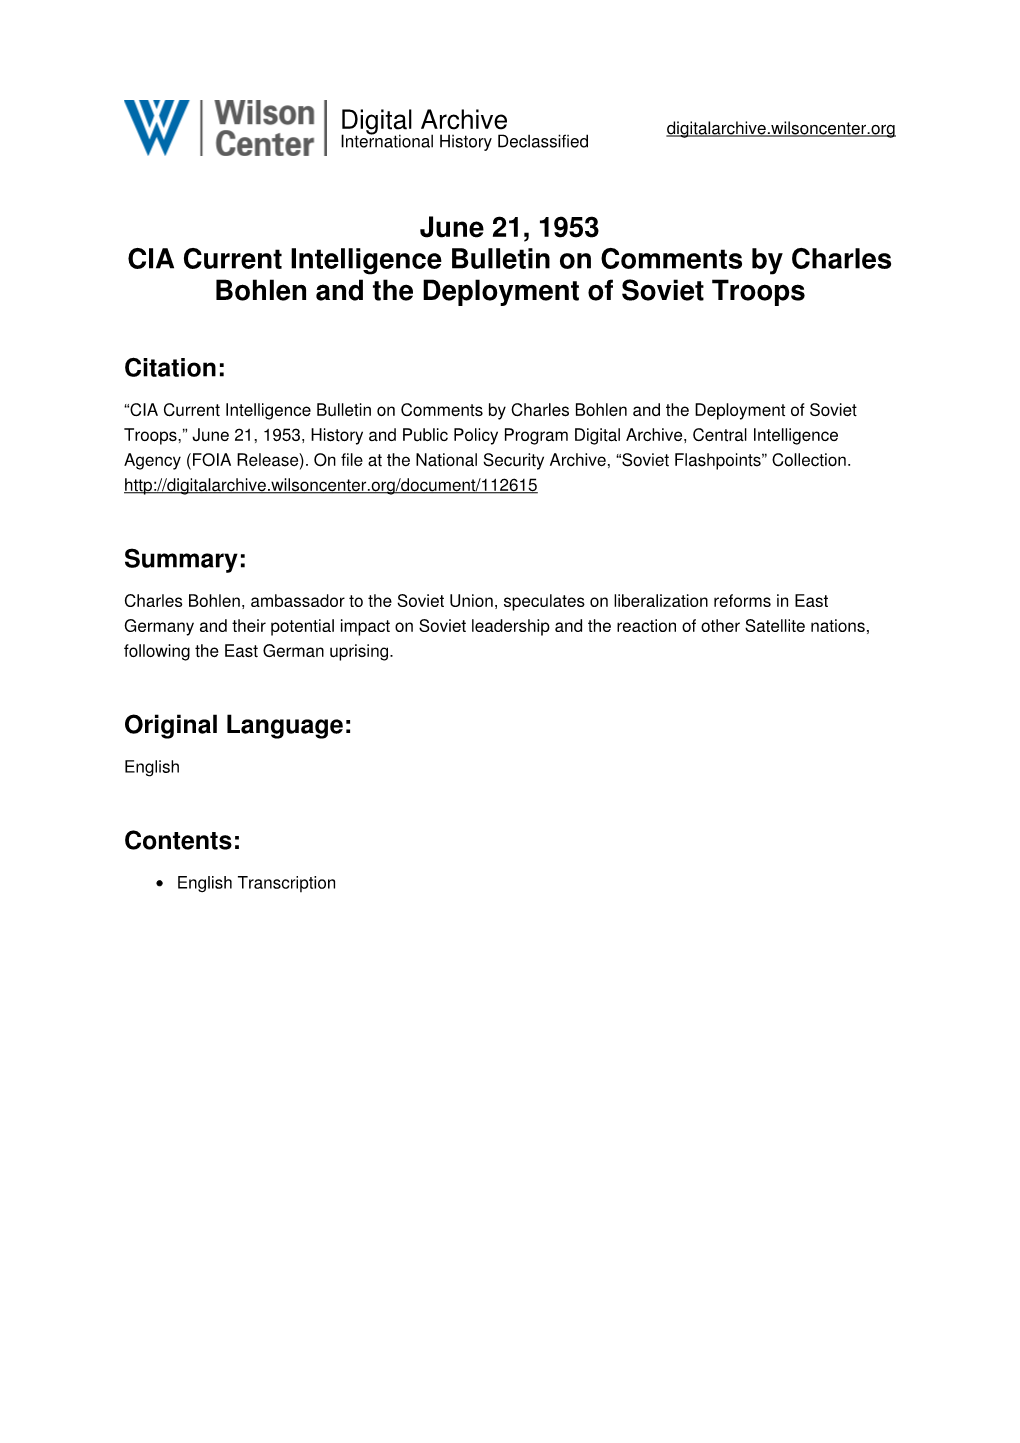 June 21, 1953 CIA Current Intelligence Bulletin on Comments by Charles Bohlen and the Deployment of Soviet Troops